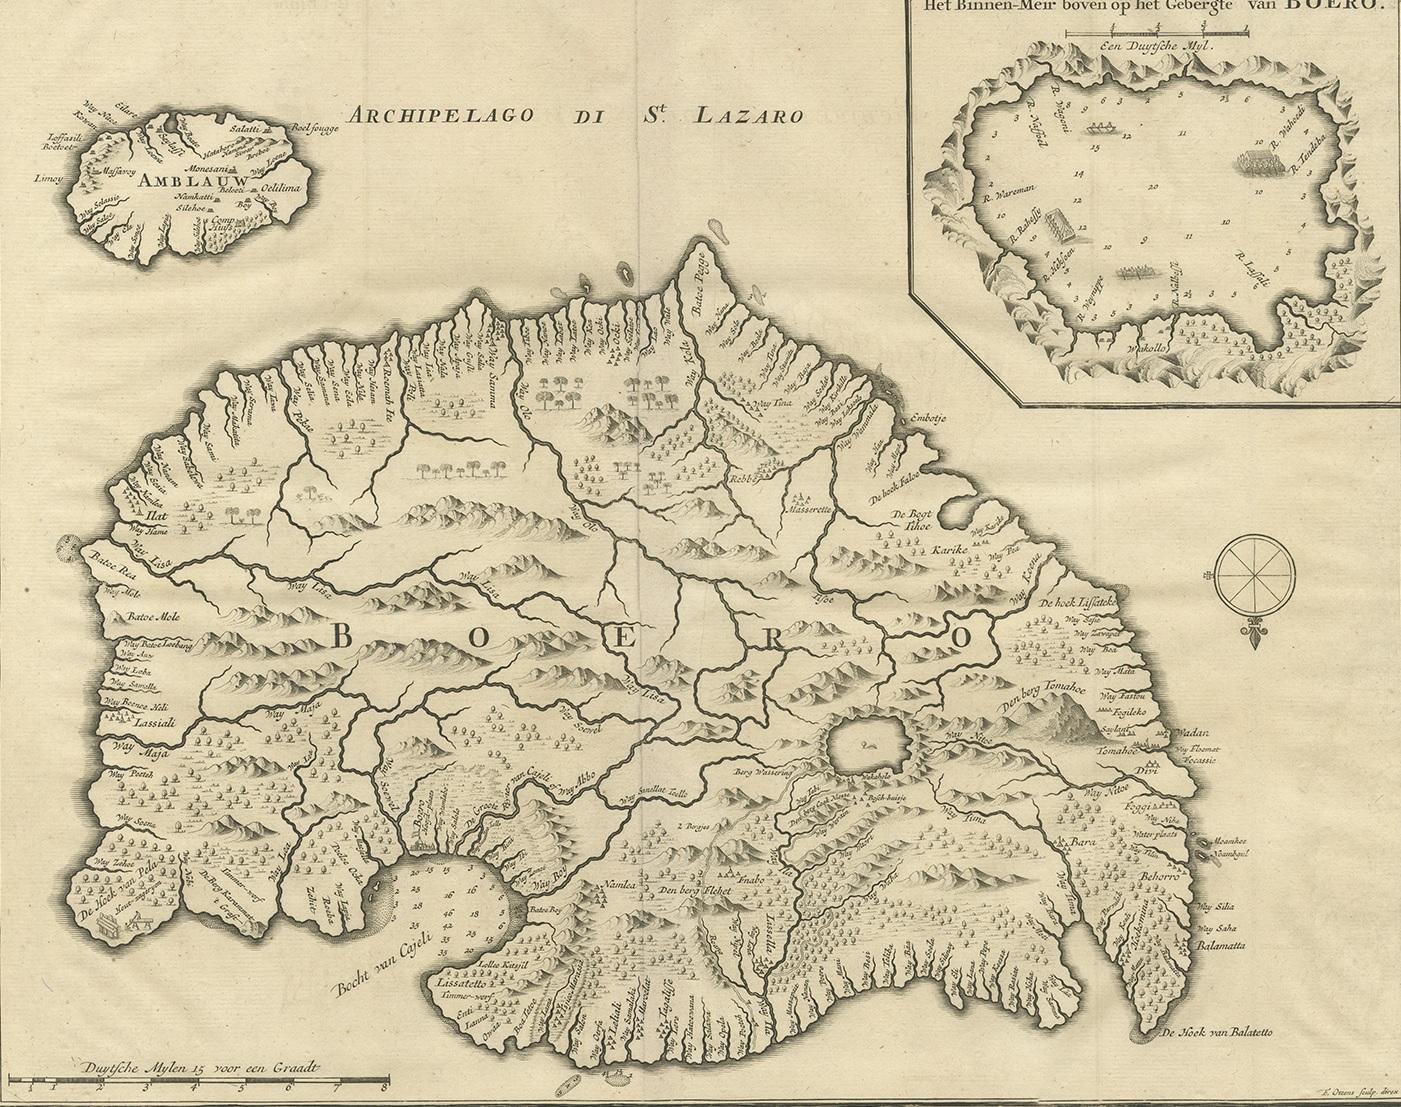 Antique map titled 'Boero-Amblauw'. Detailed map of the Island Ambelau and Buru, Maluku Islands, Indonesia. With an inset of the lake on the Buru mountains. This print originates from 'Oud en Nieuw Oost-Indiën' by F. Valentijn.